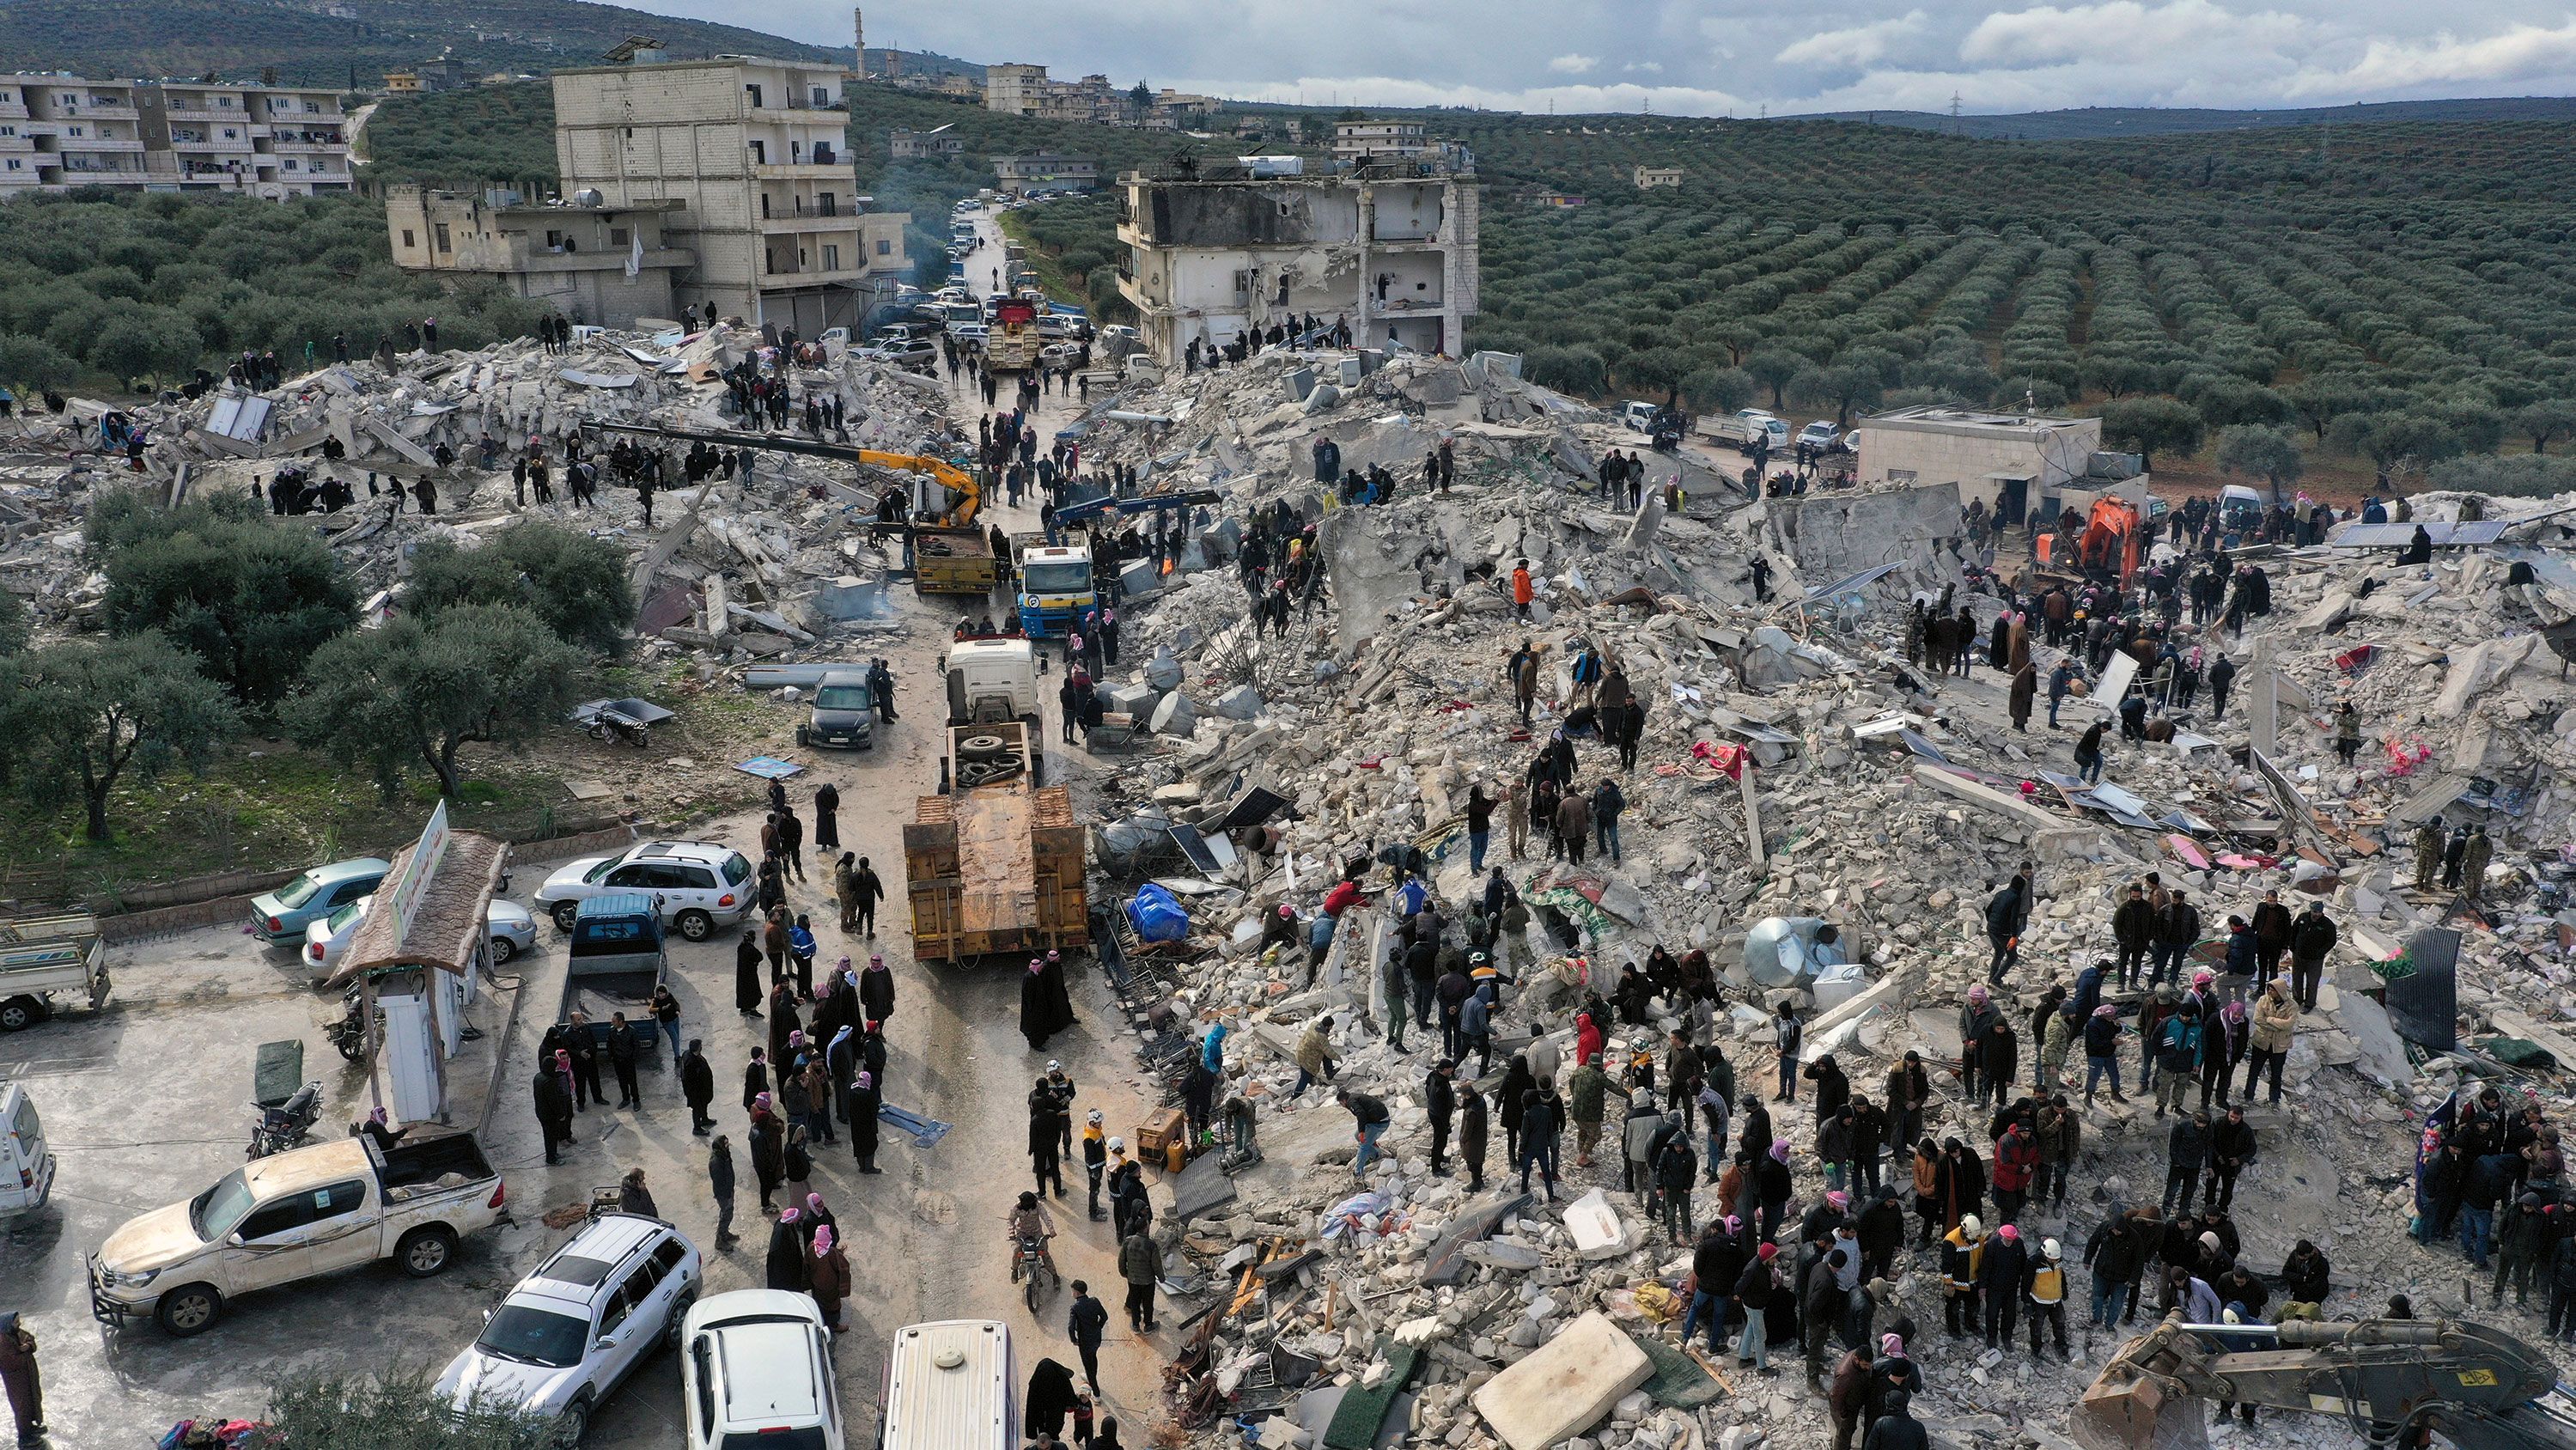 Residents search through the rubble of collapsed buildings near the Turkish border, Idlib province, Syria, Feb. 6, 2023.